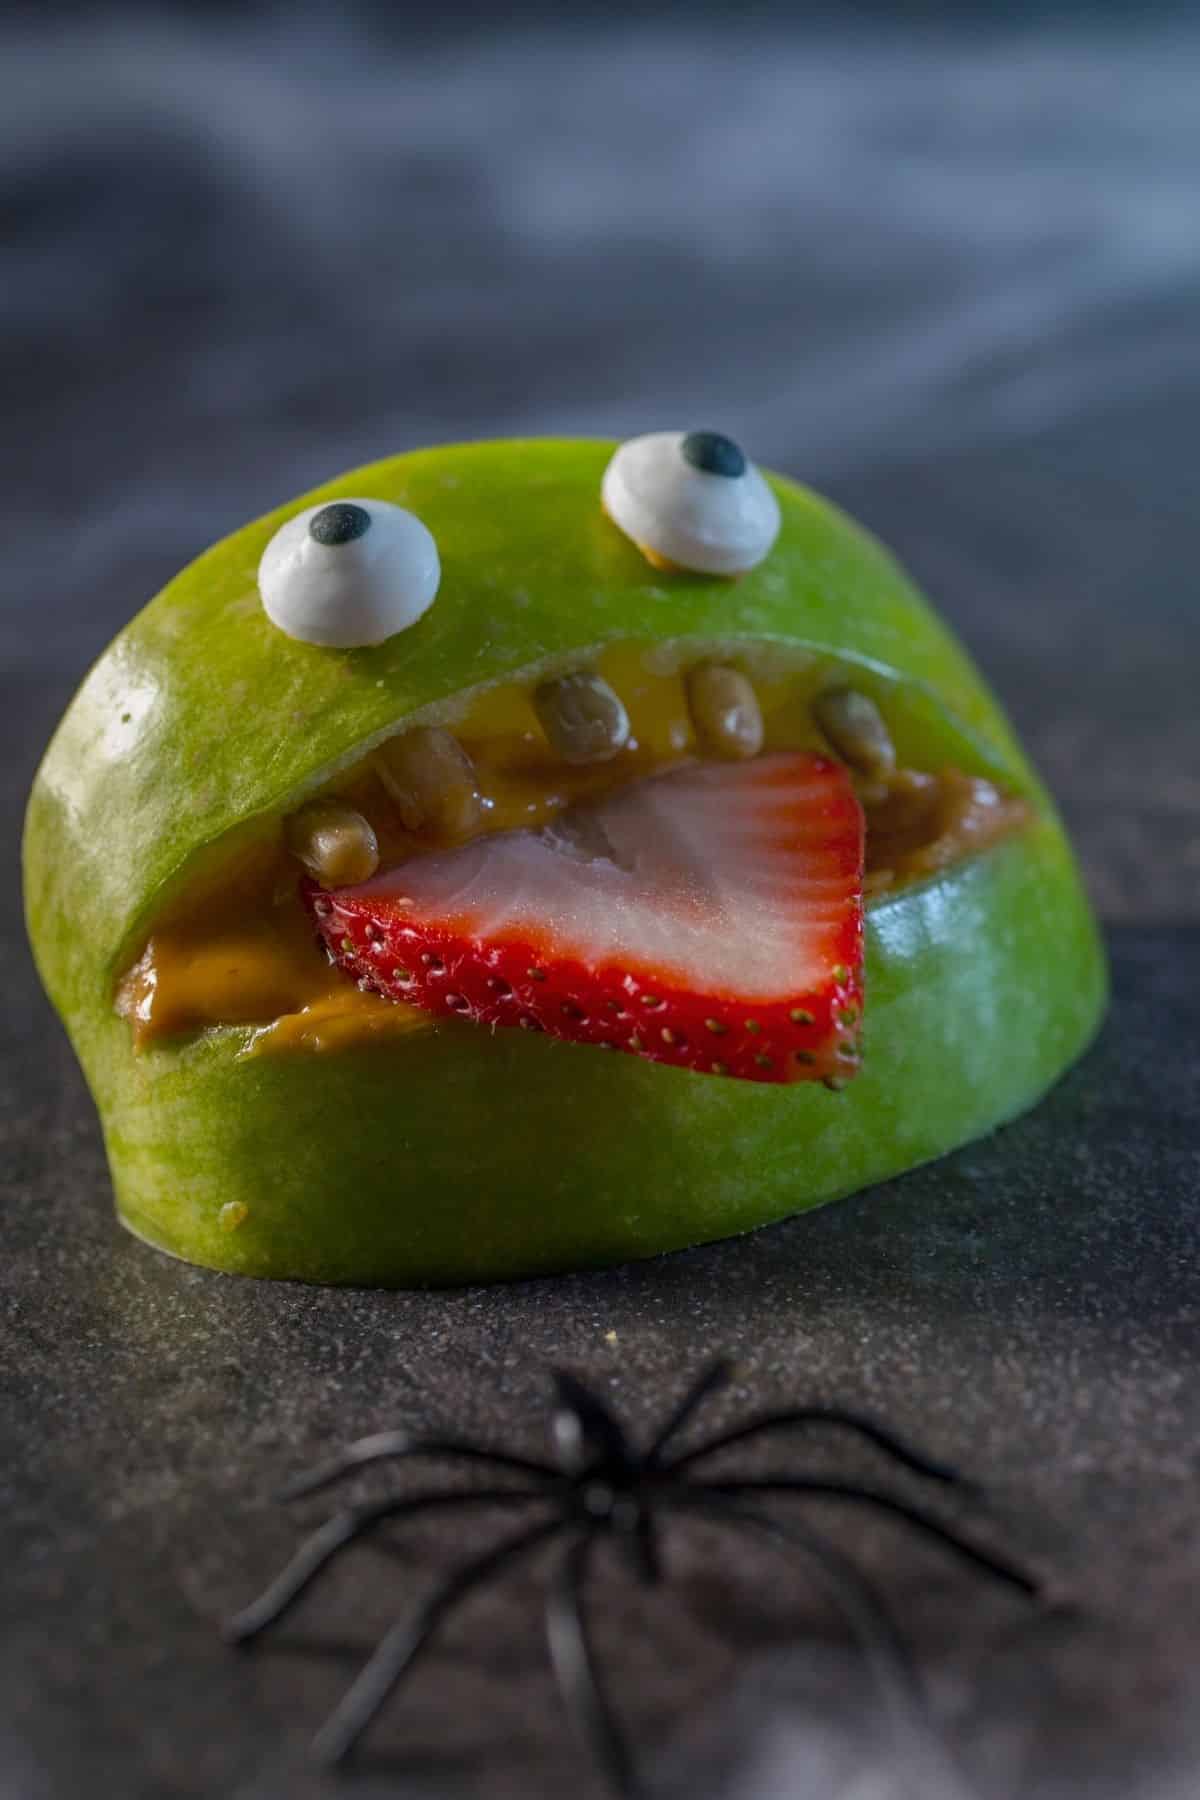 funny face made using an apple and strawberry.